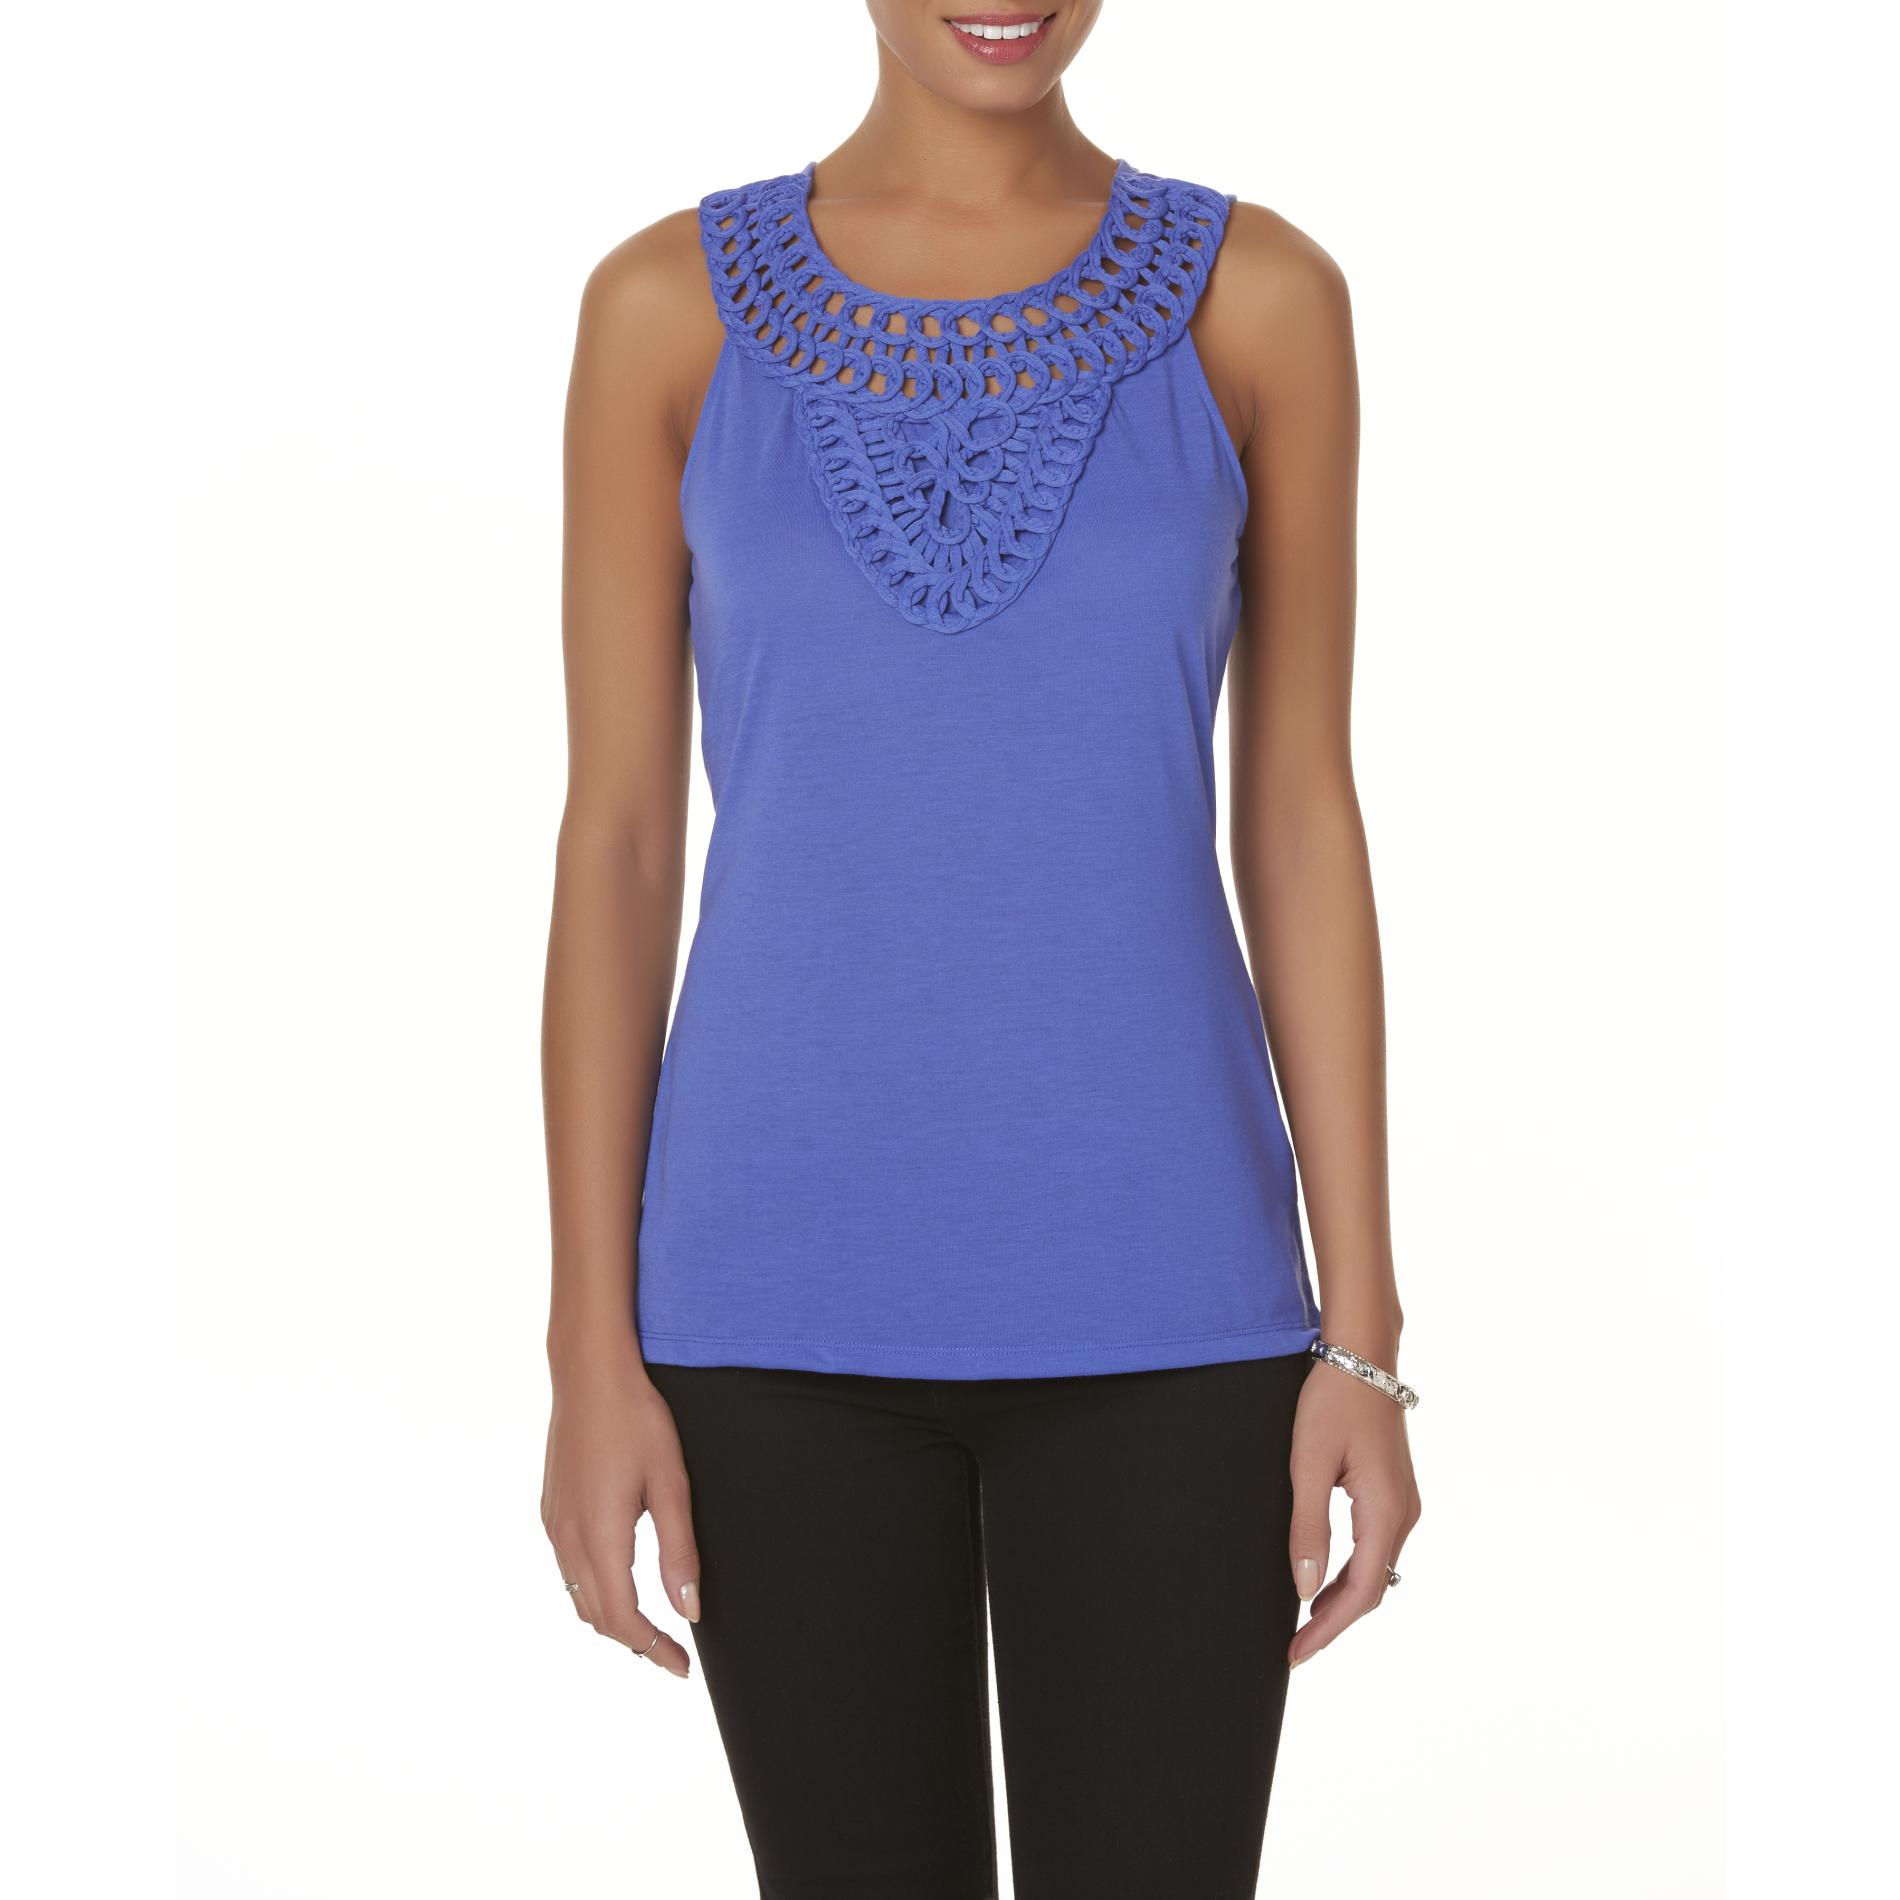 Simply Styled Women's Embellished Tank Top